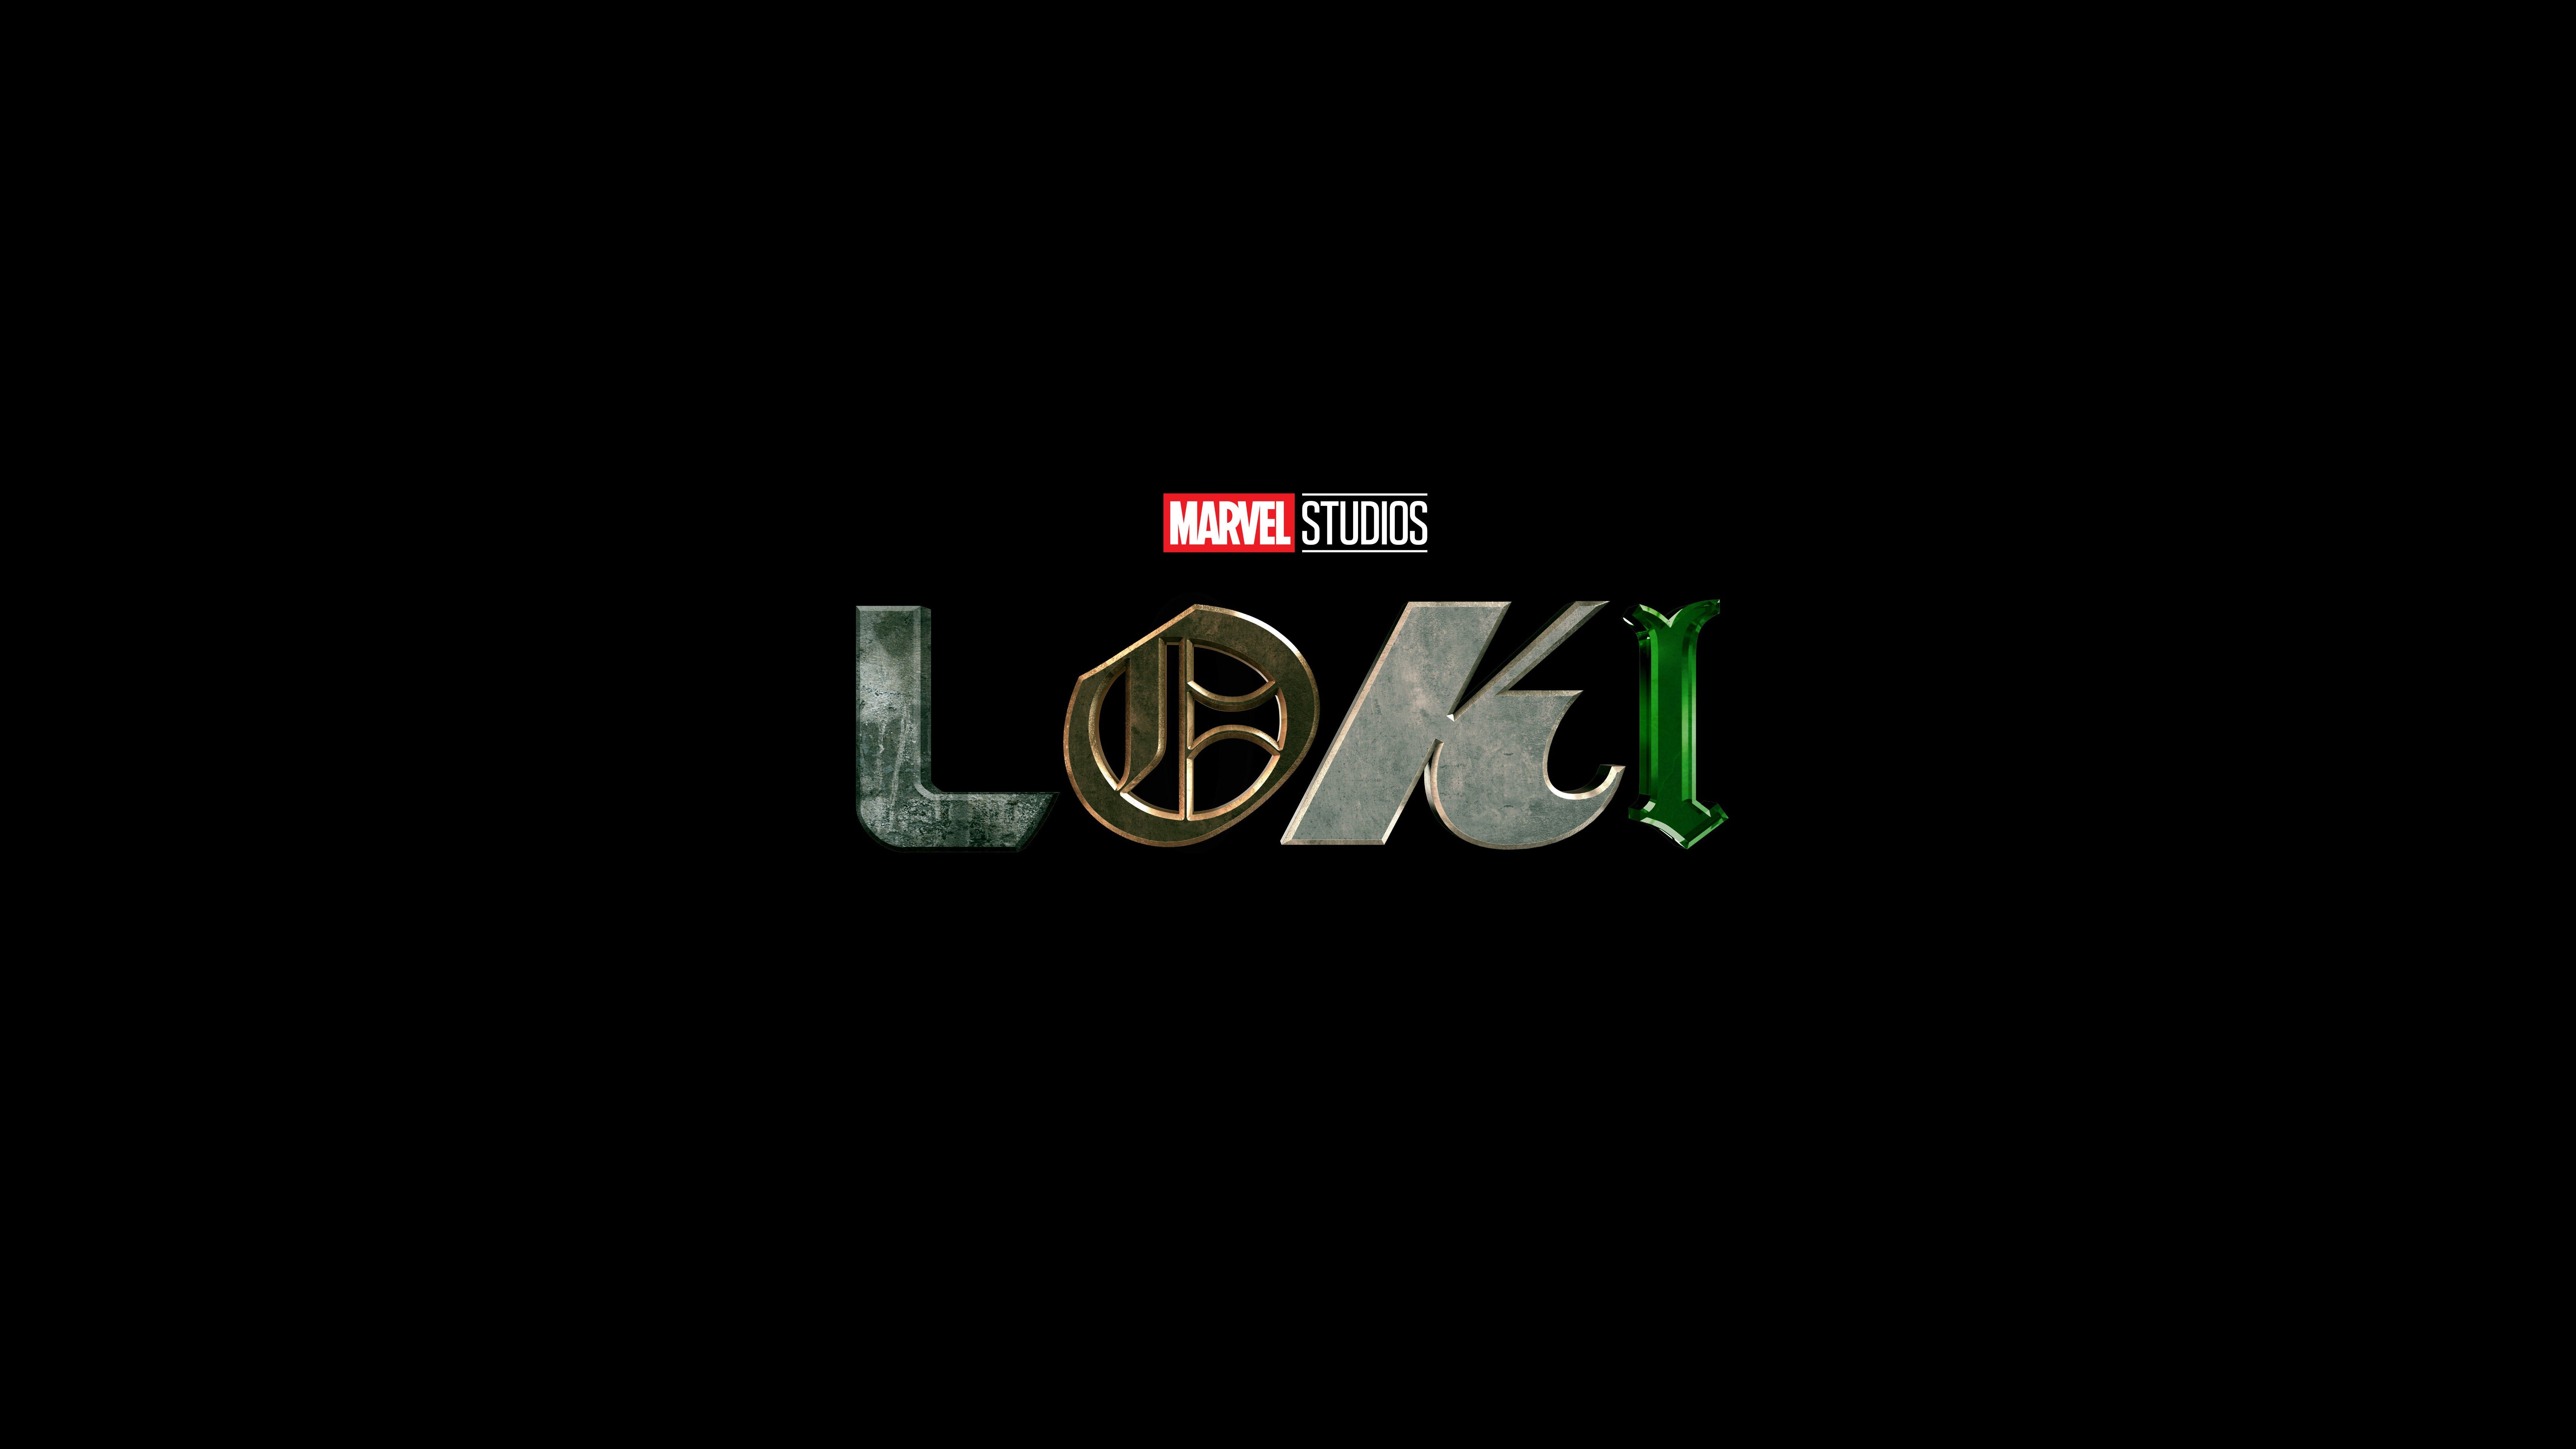 Loki Wallpaper for mobile phone tablet desktop computer and other devices  HD and 4K wallpapers  Loki marvel Loki wallpaper Marvel artwork